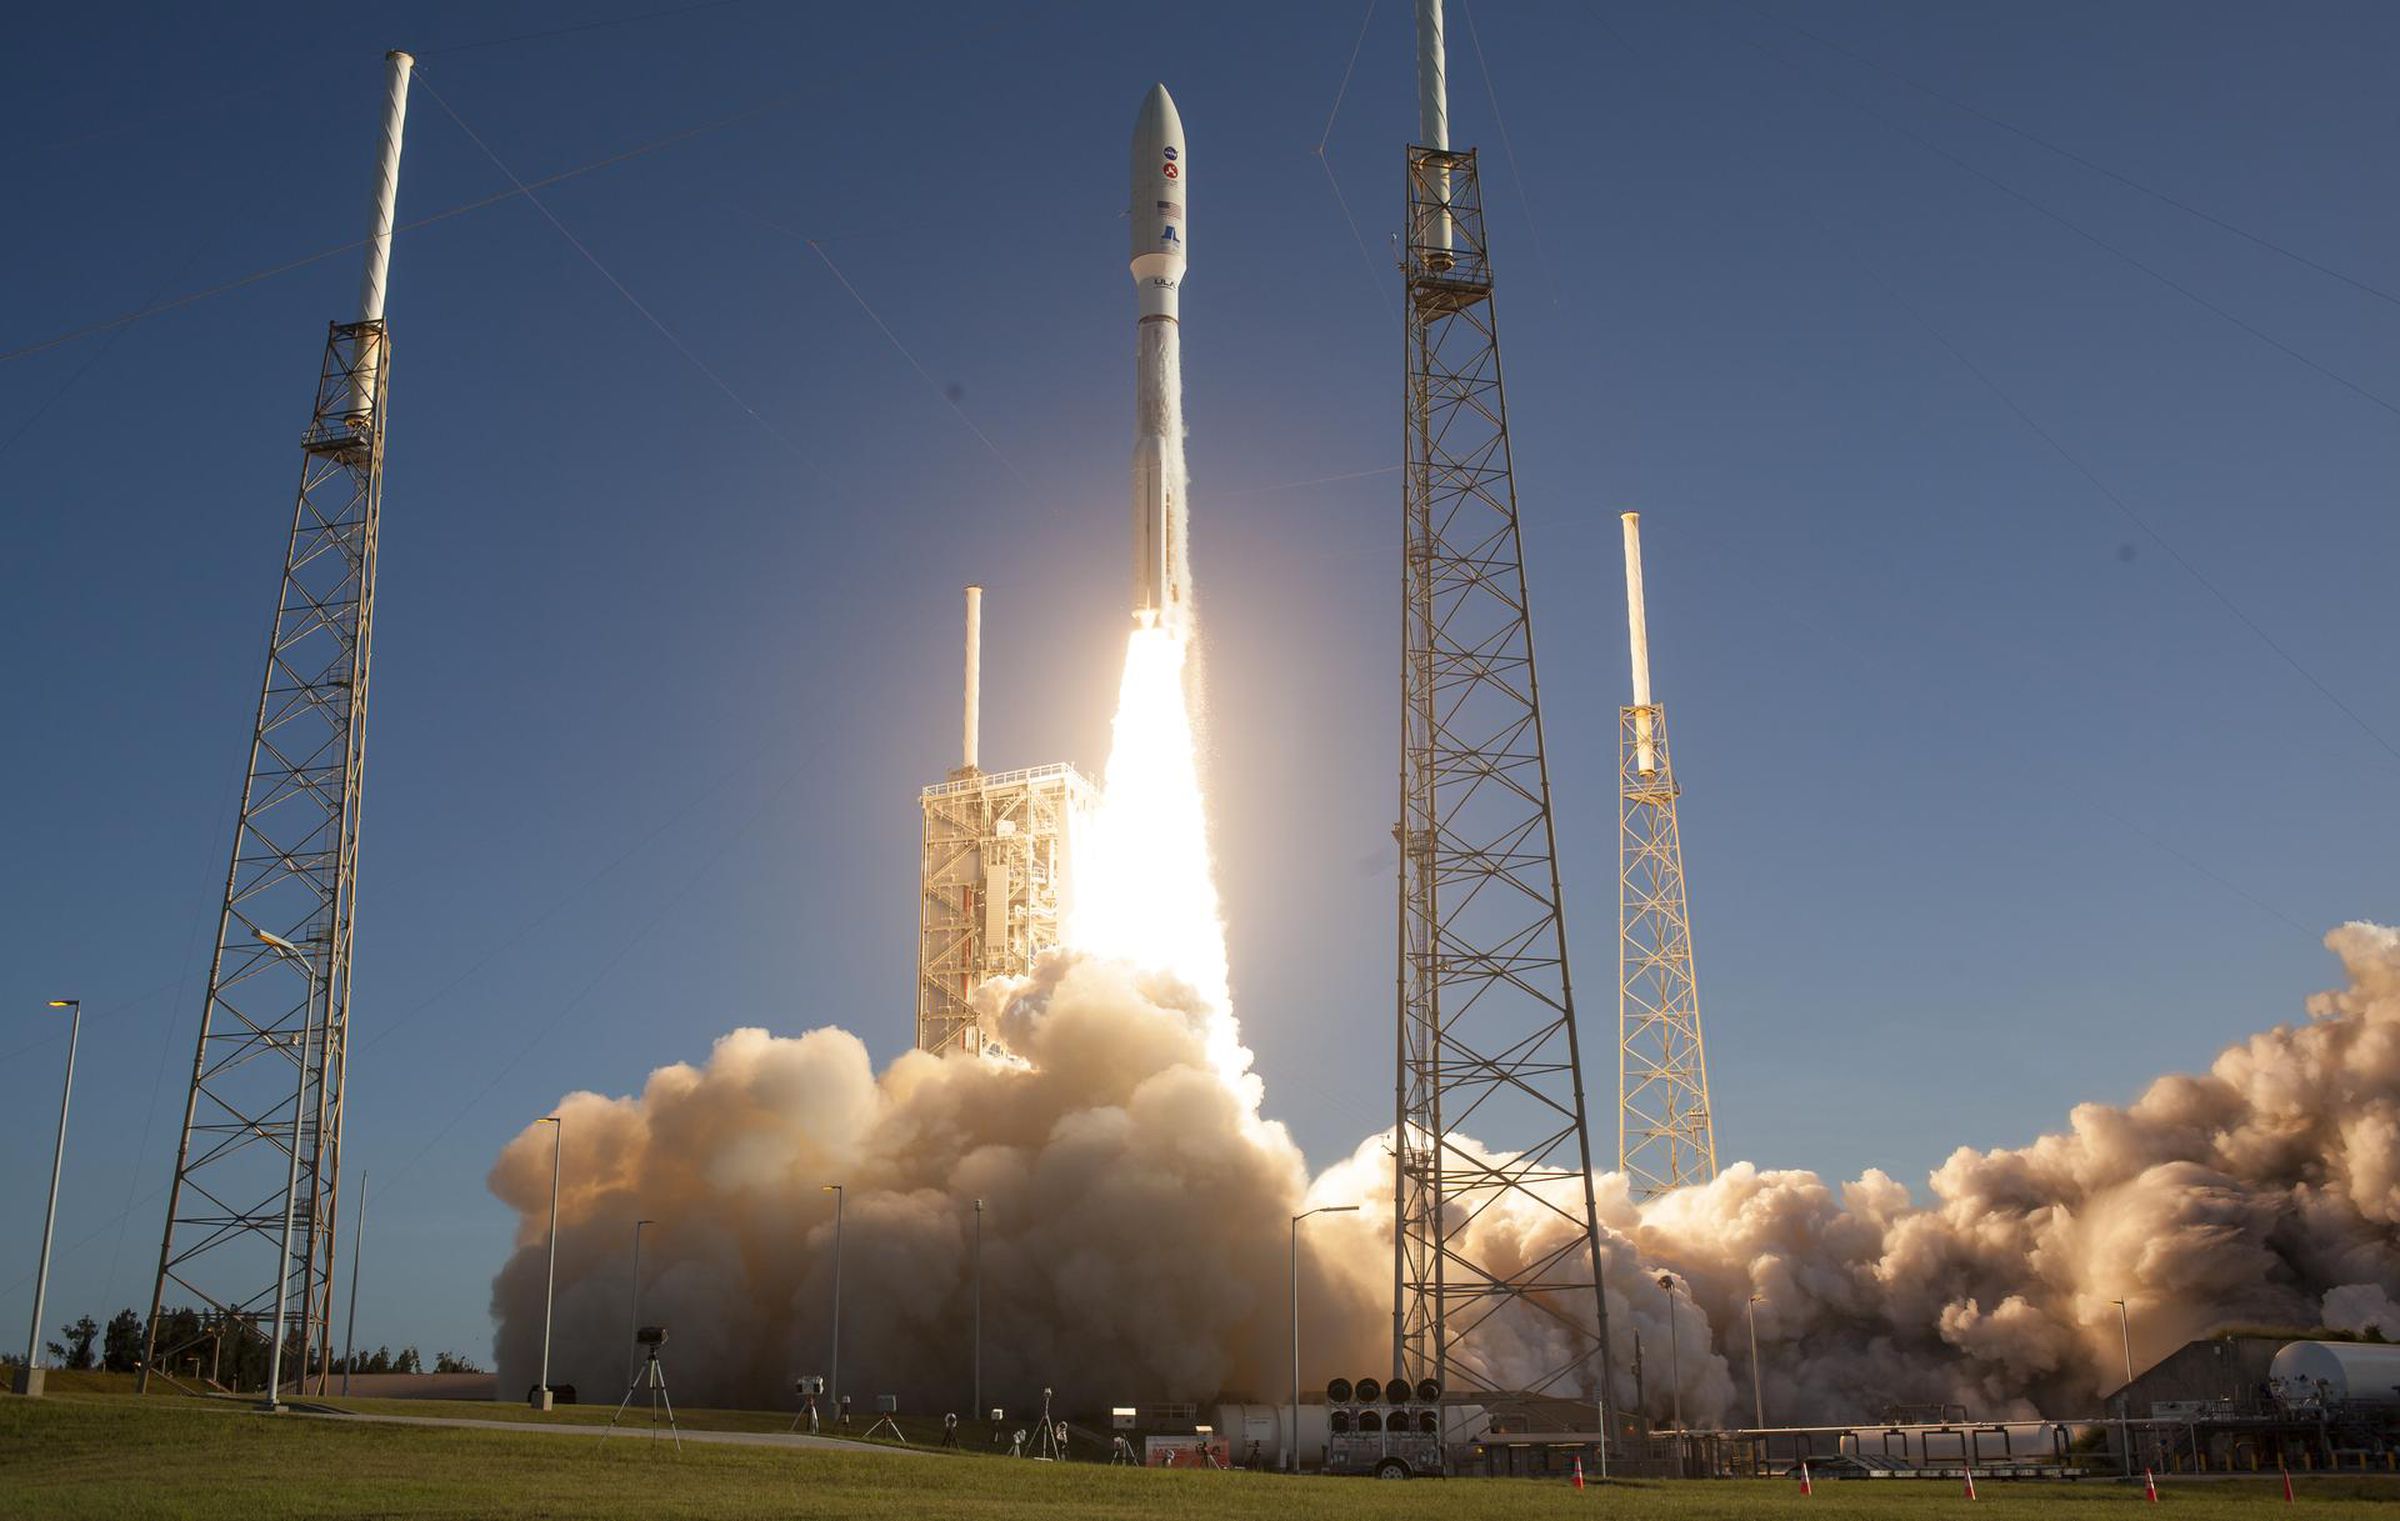 ULA’s Atlas V rocket launched NASA’s Perseverance rover to Mars in July.